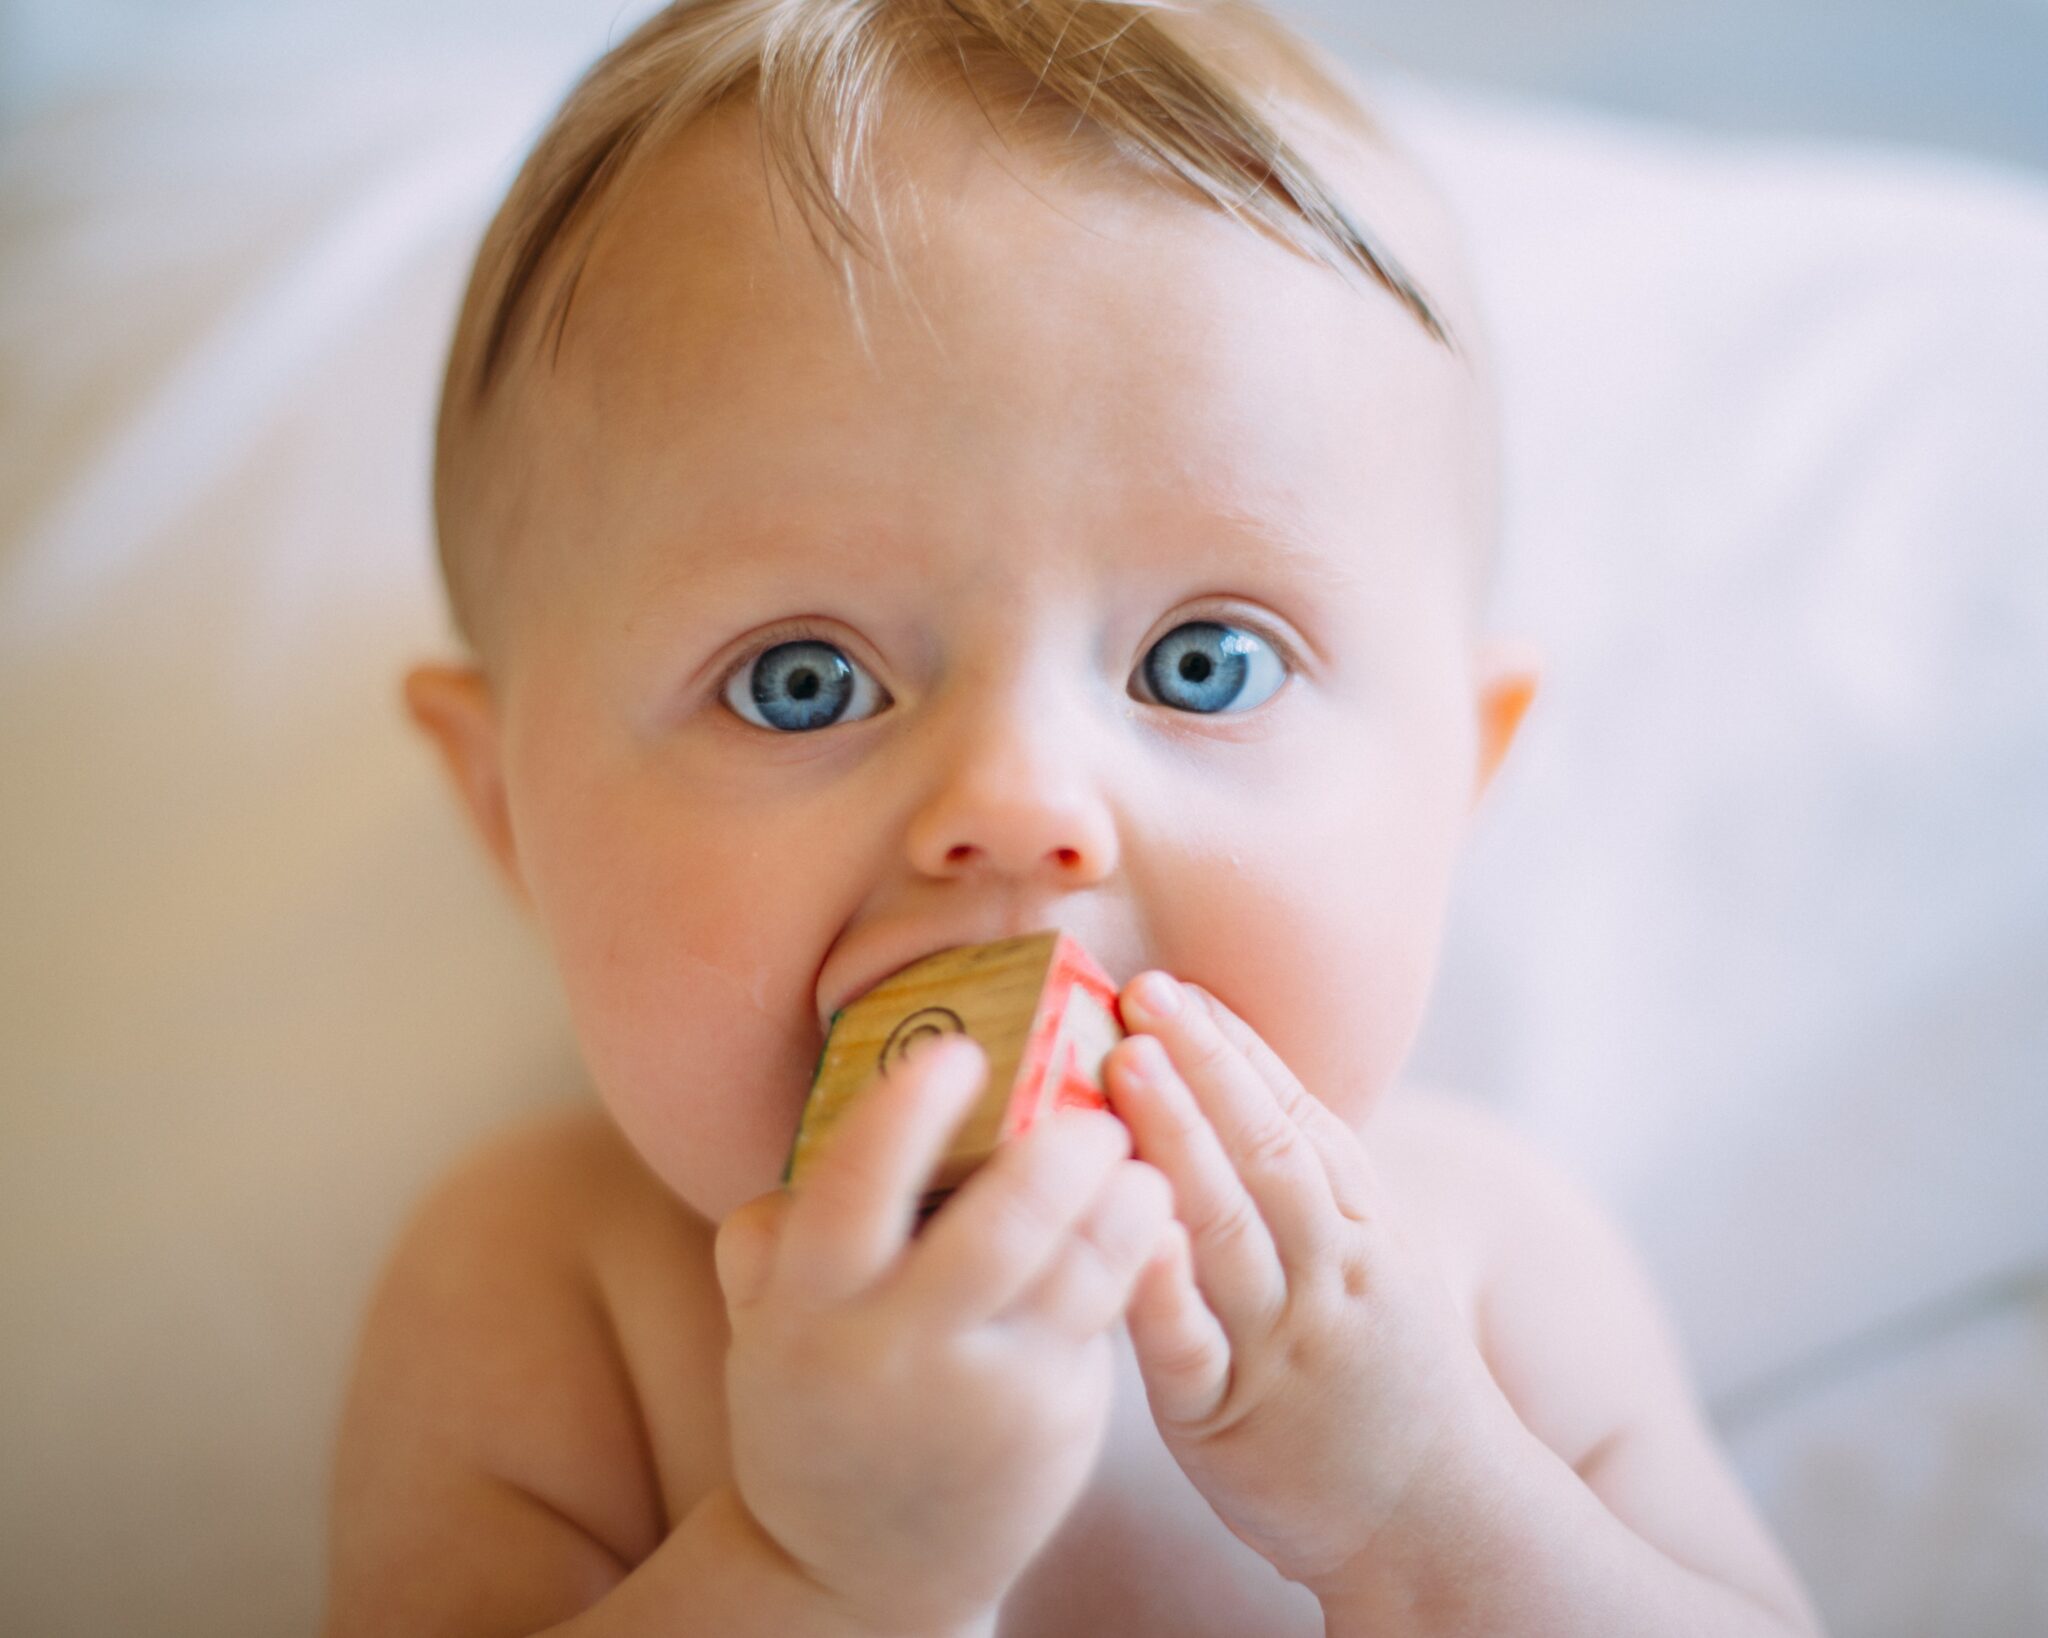 Pediatric Dentistry Mystery: Why do babies put objects in their mouths?